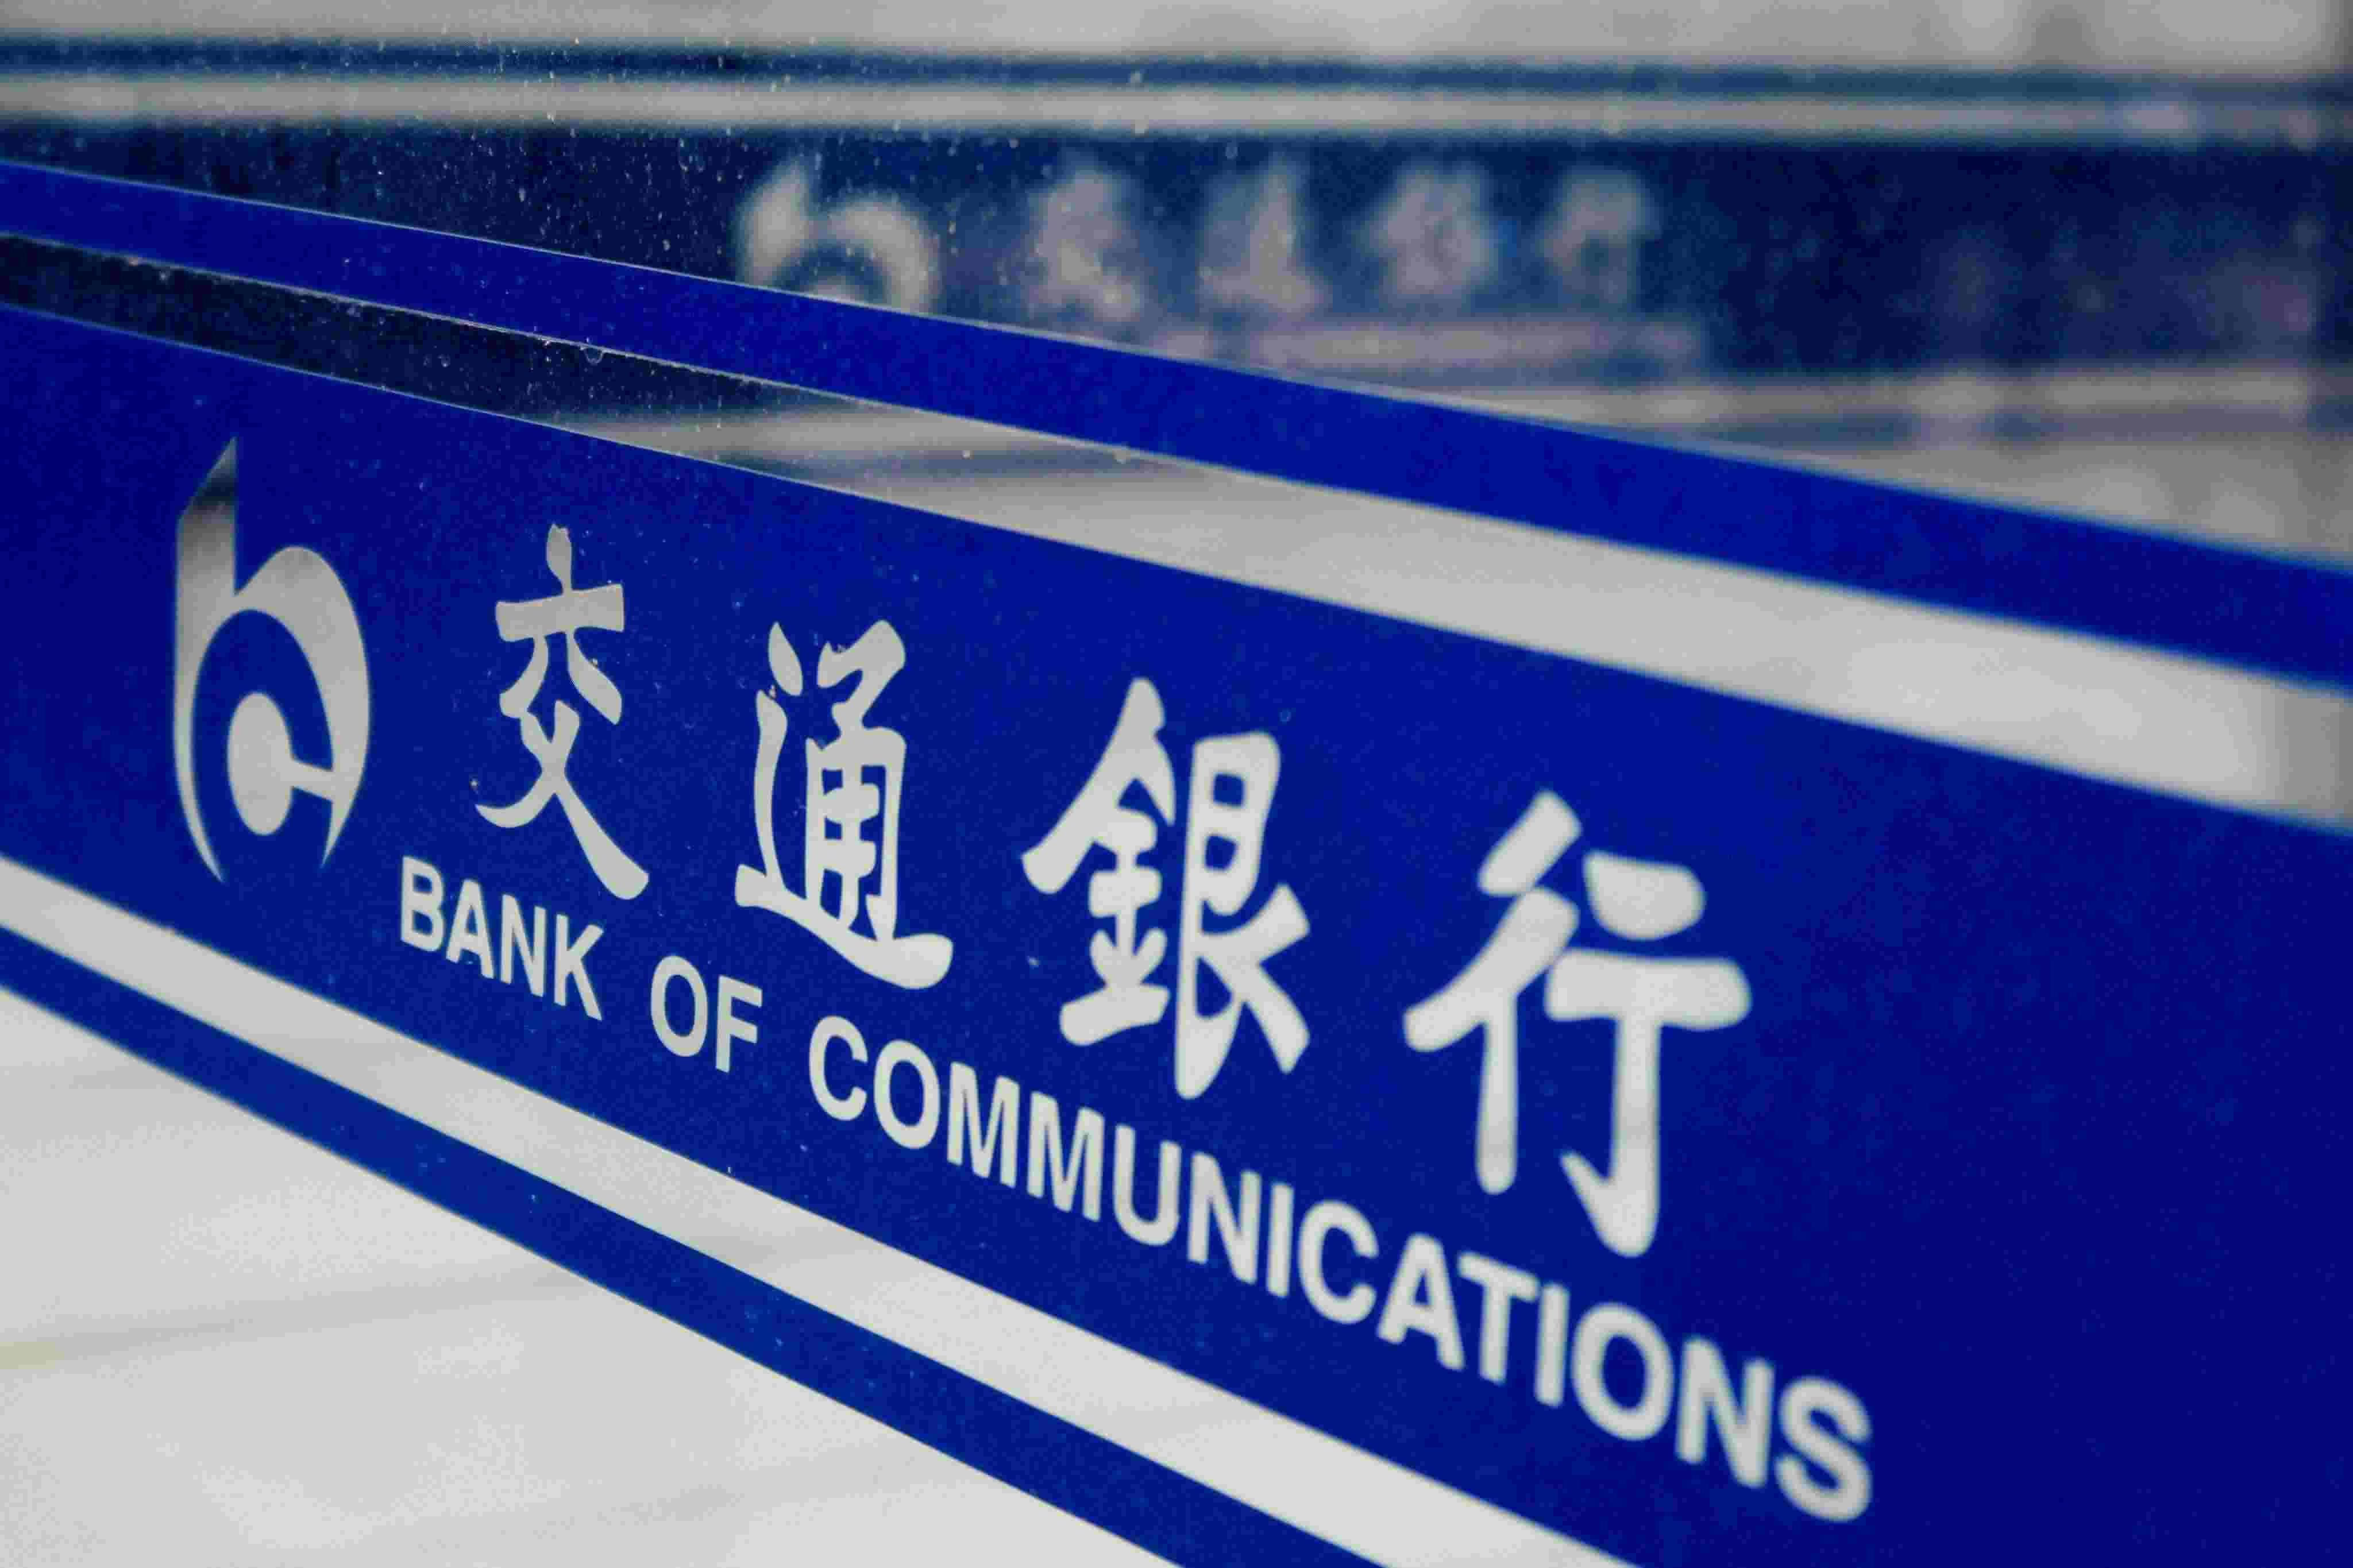 17-facts-about-bank-of-communications